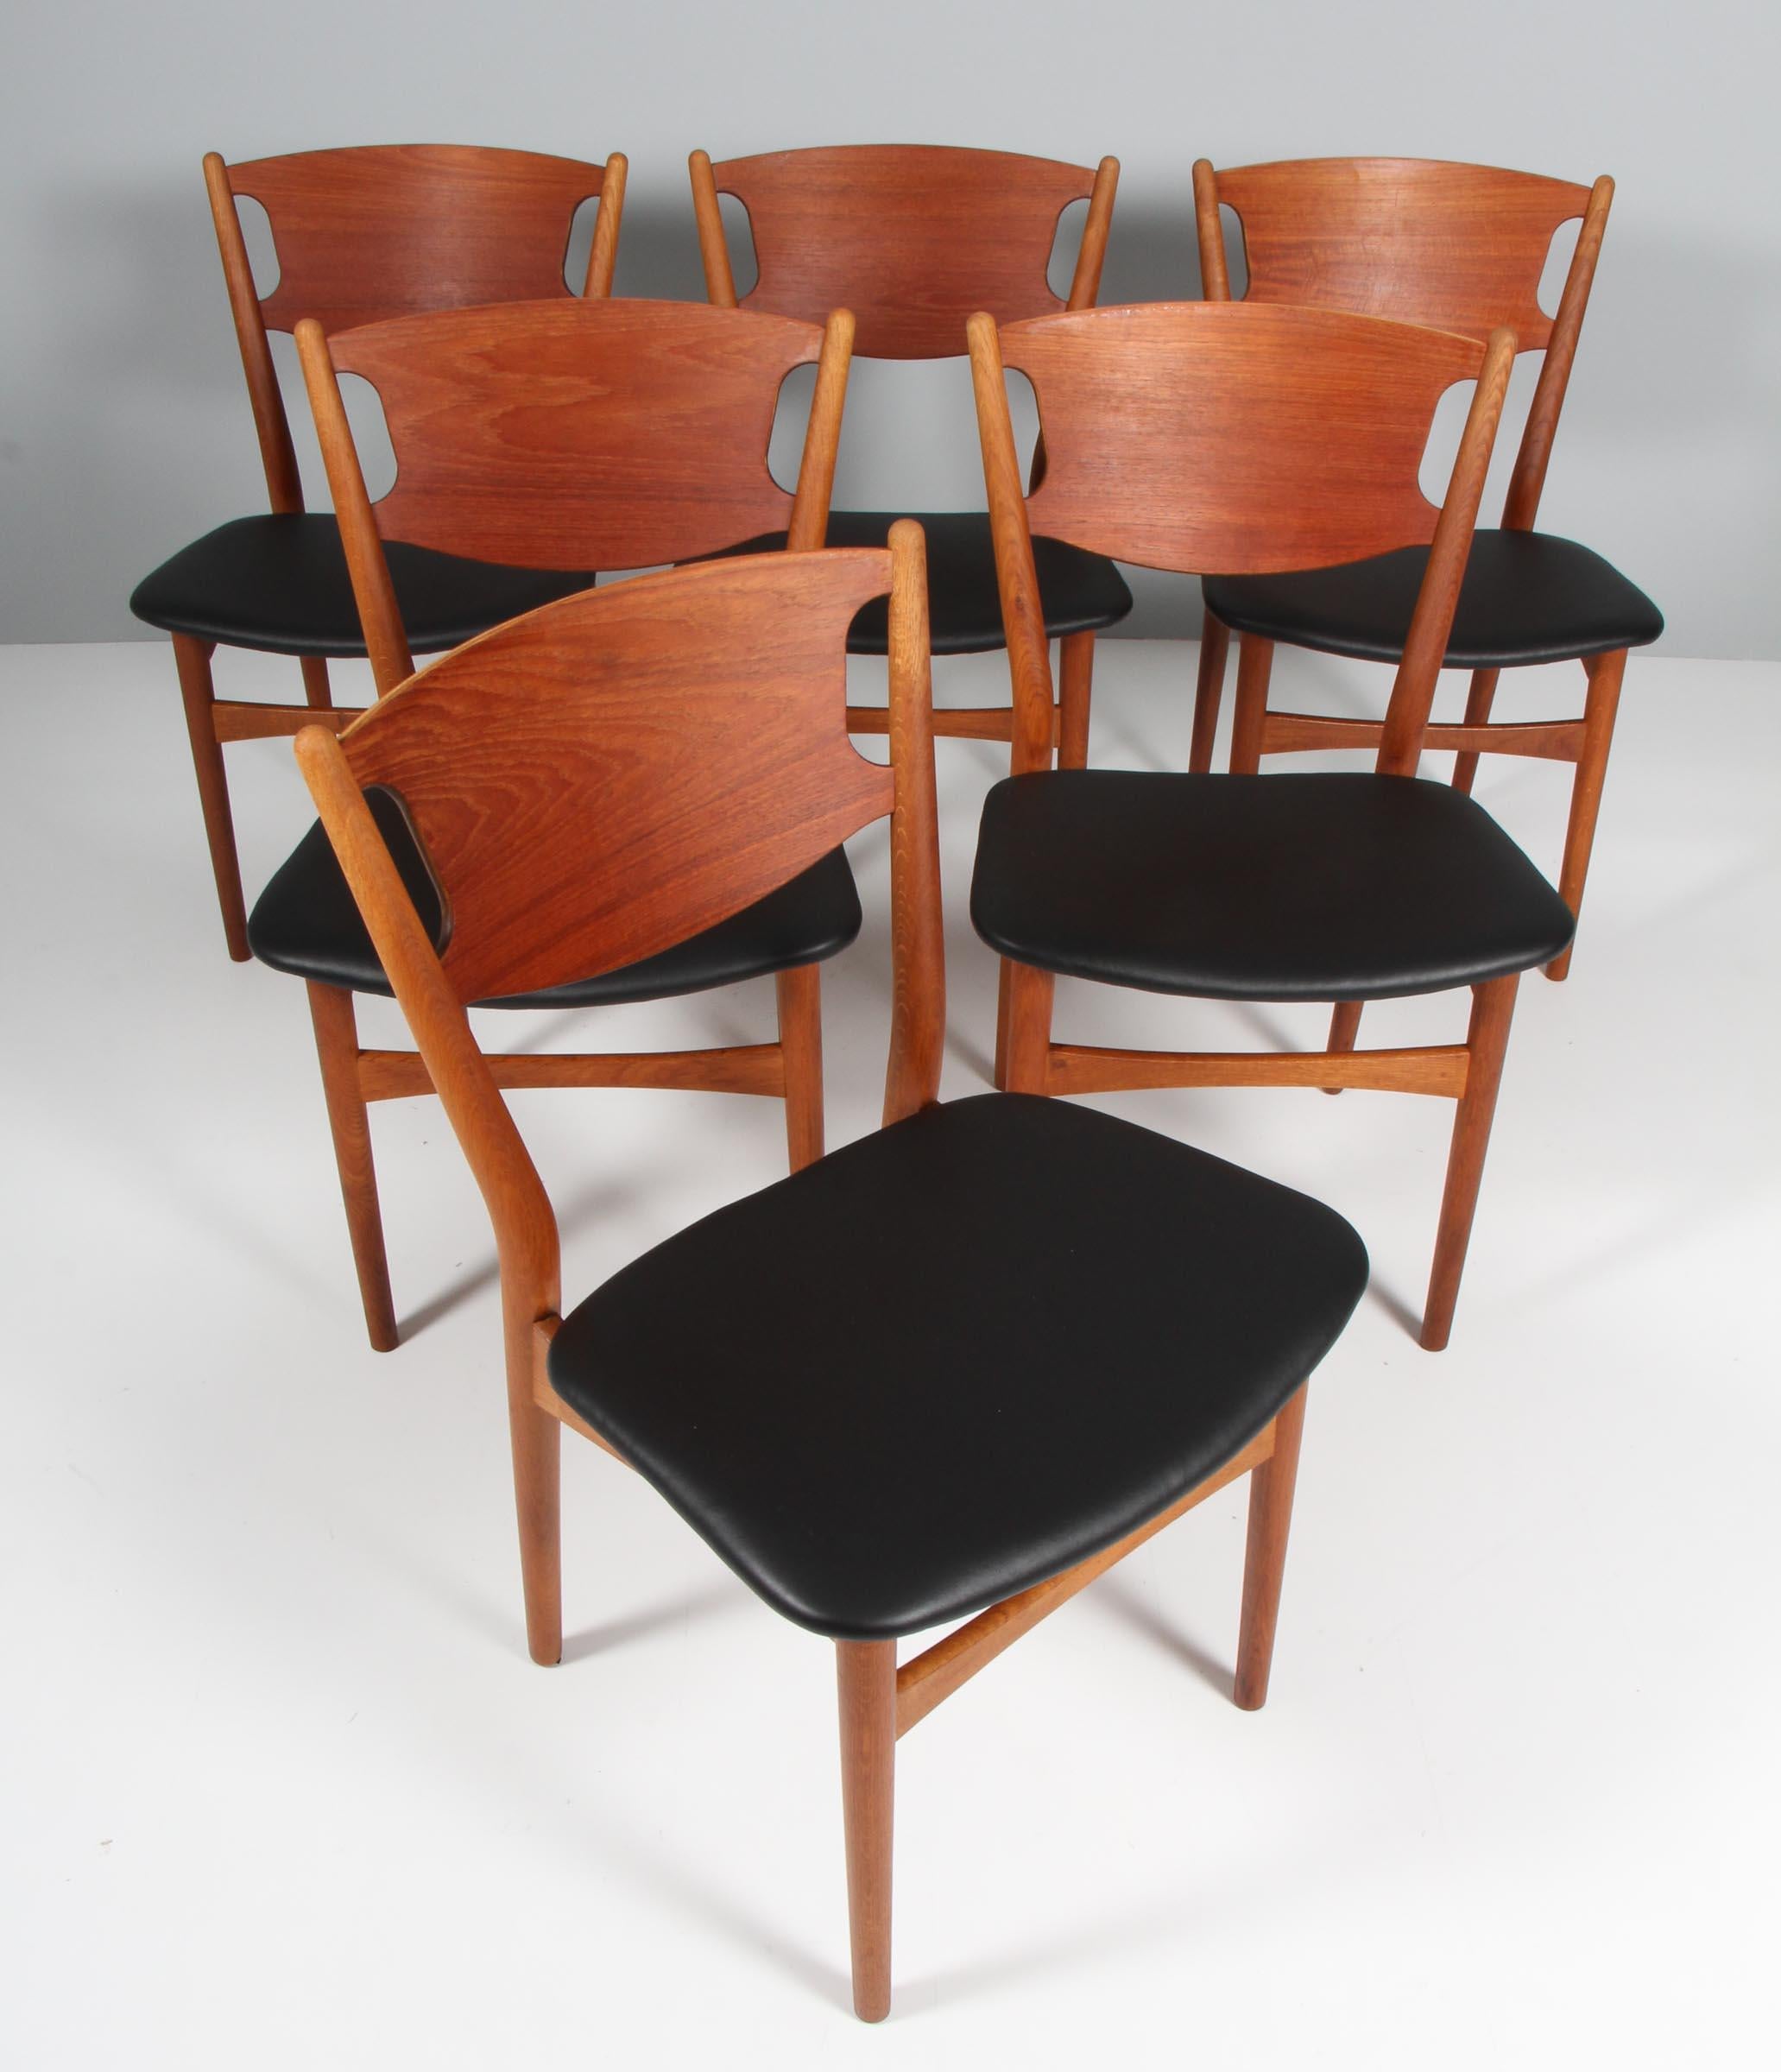 Helge Sibast six chairs with back of teak and frame of oak.

New upholstered with black leather.

Made by Sibast.